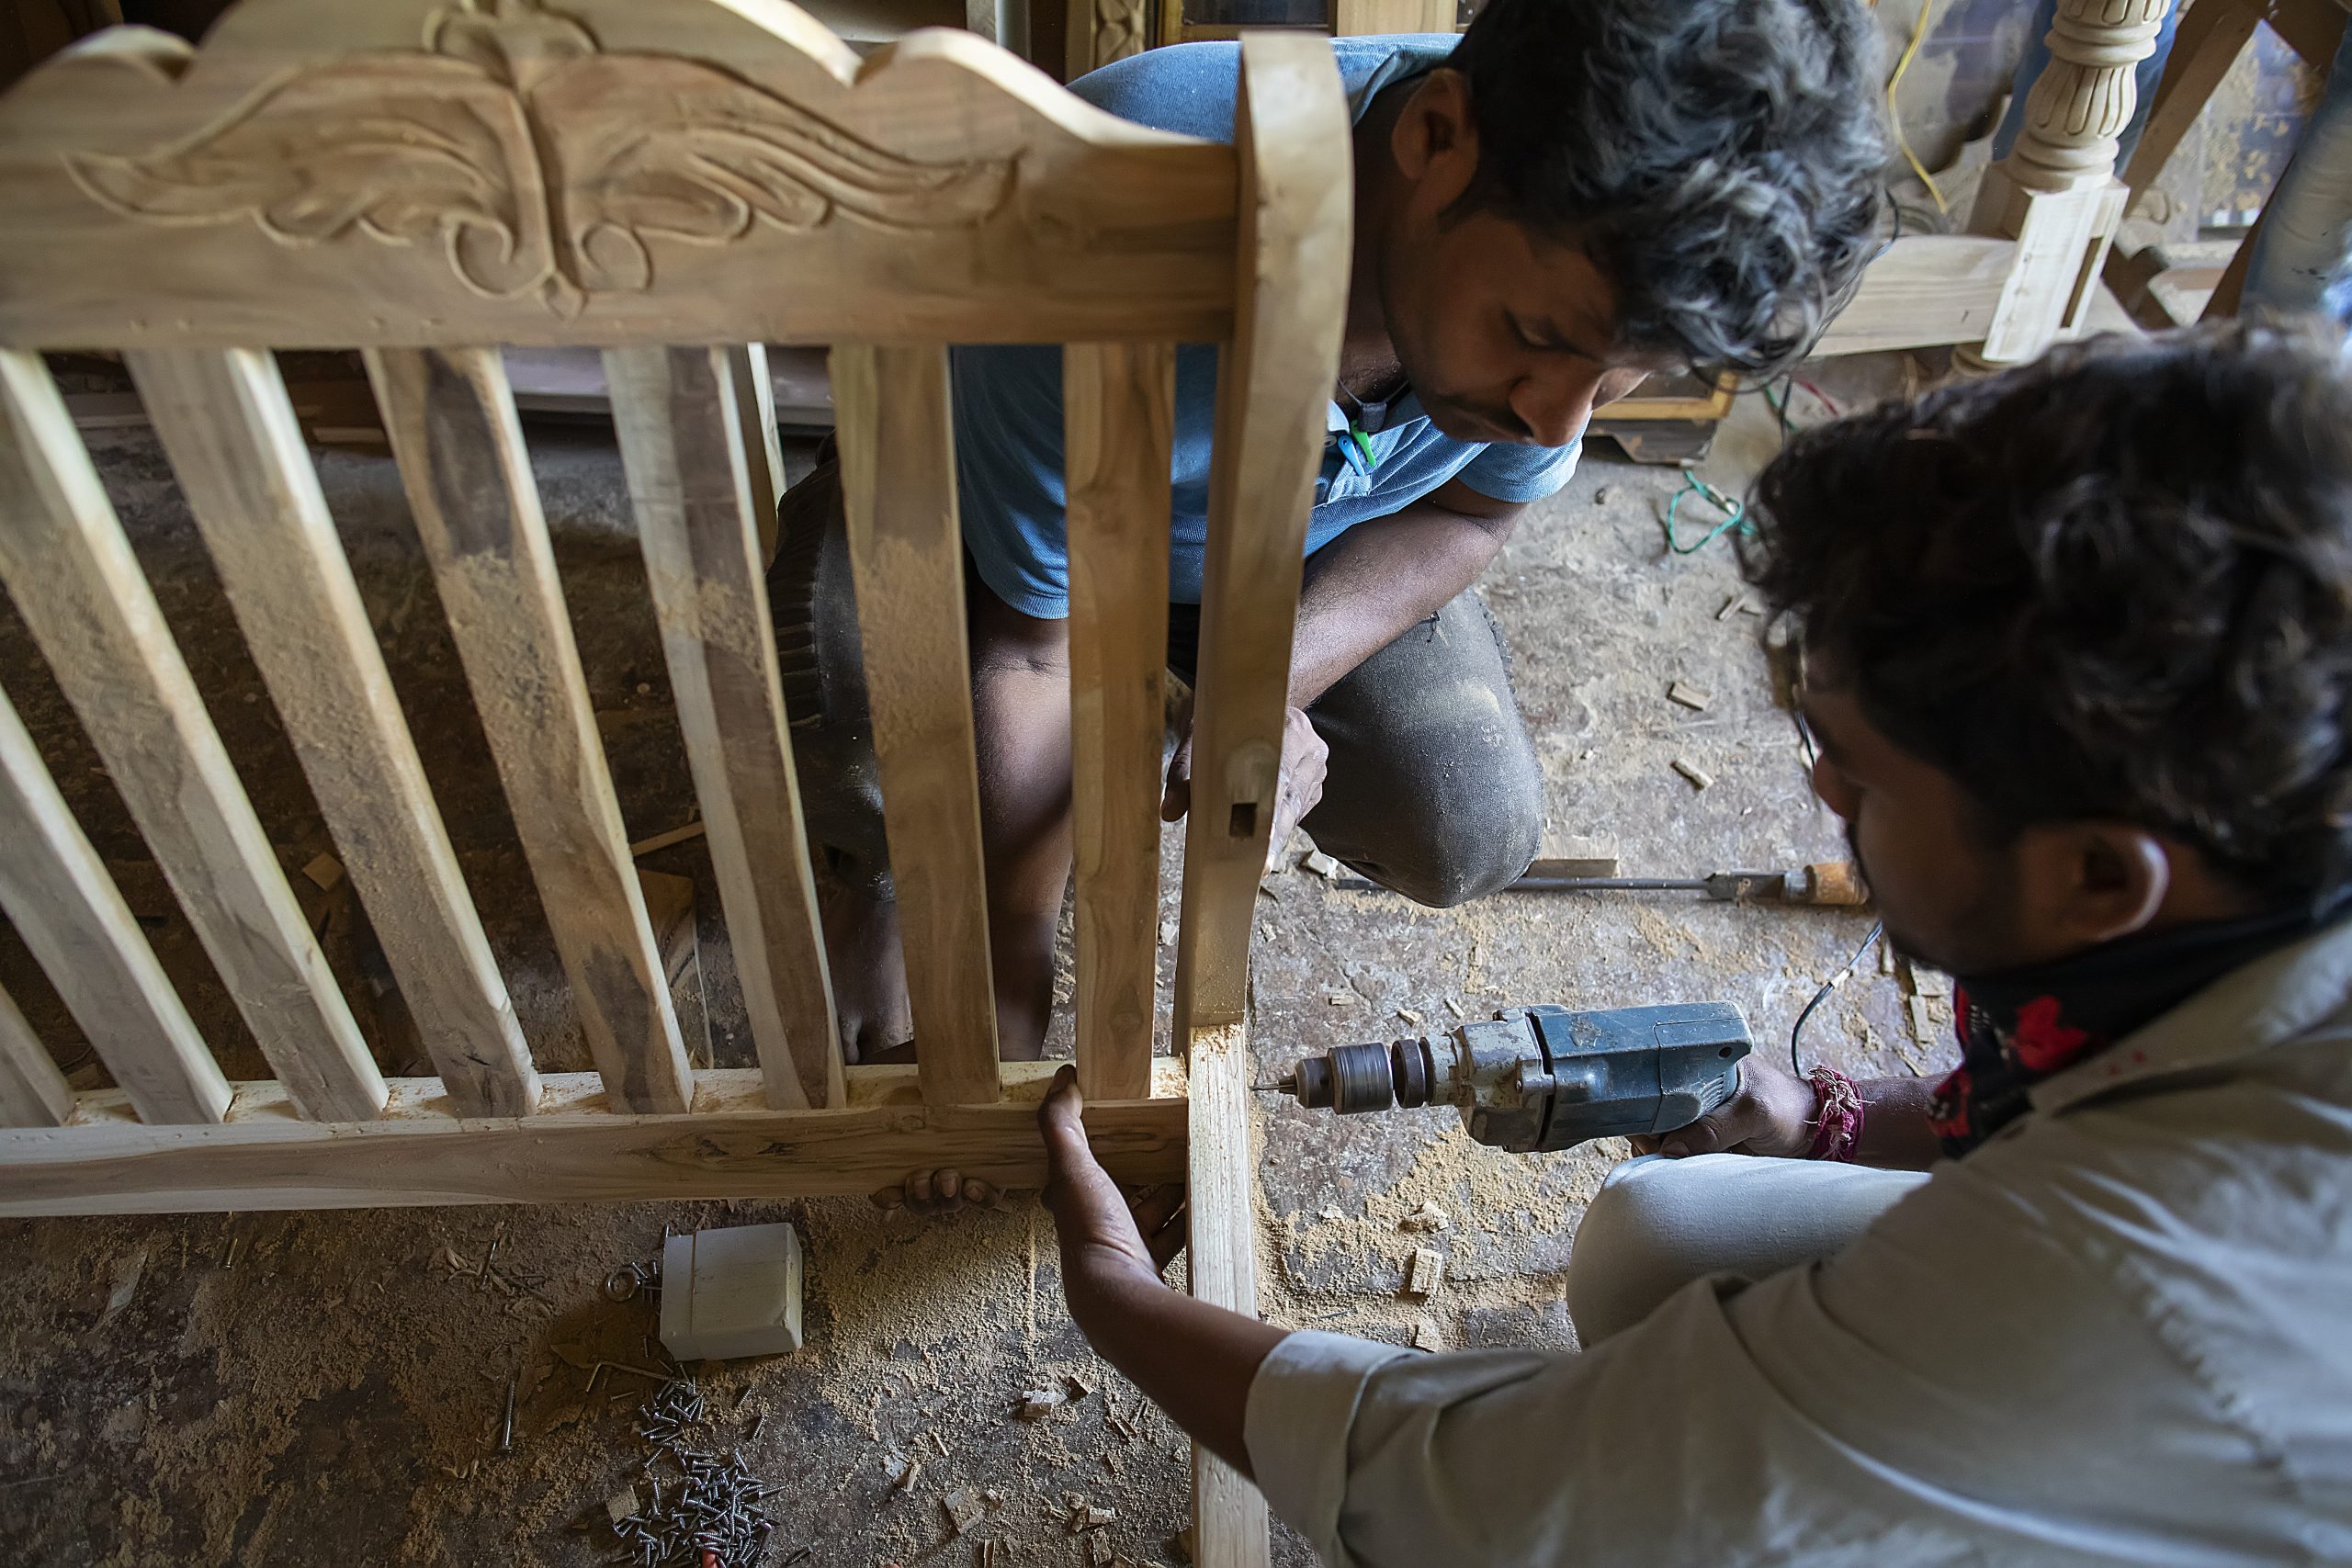 Carpenters working on a wooden design